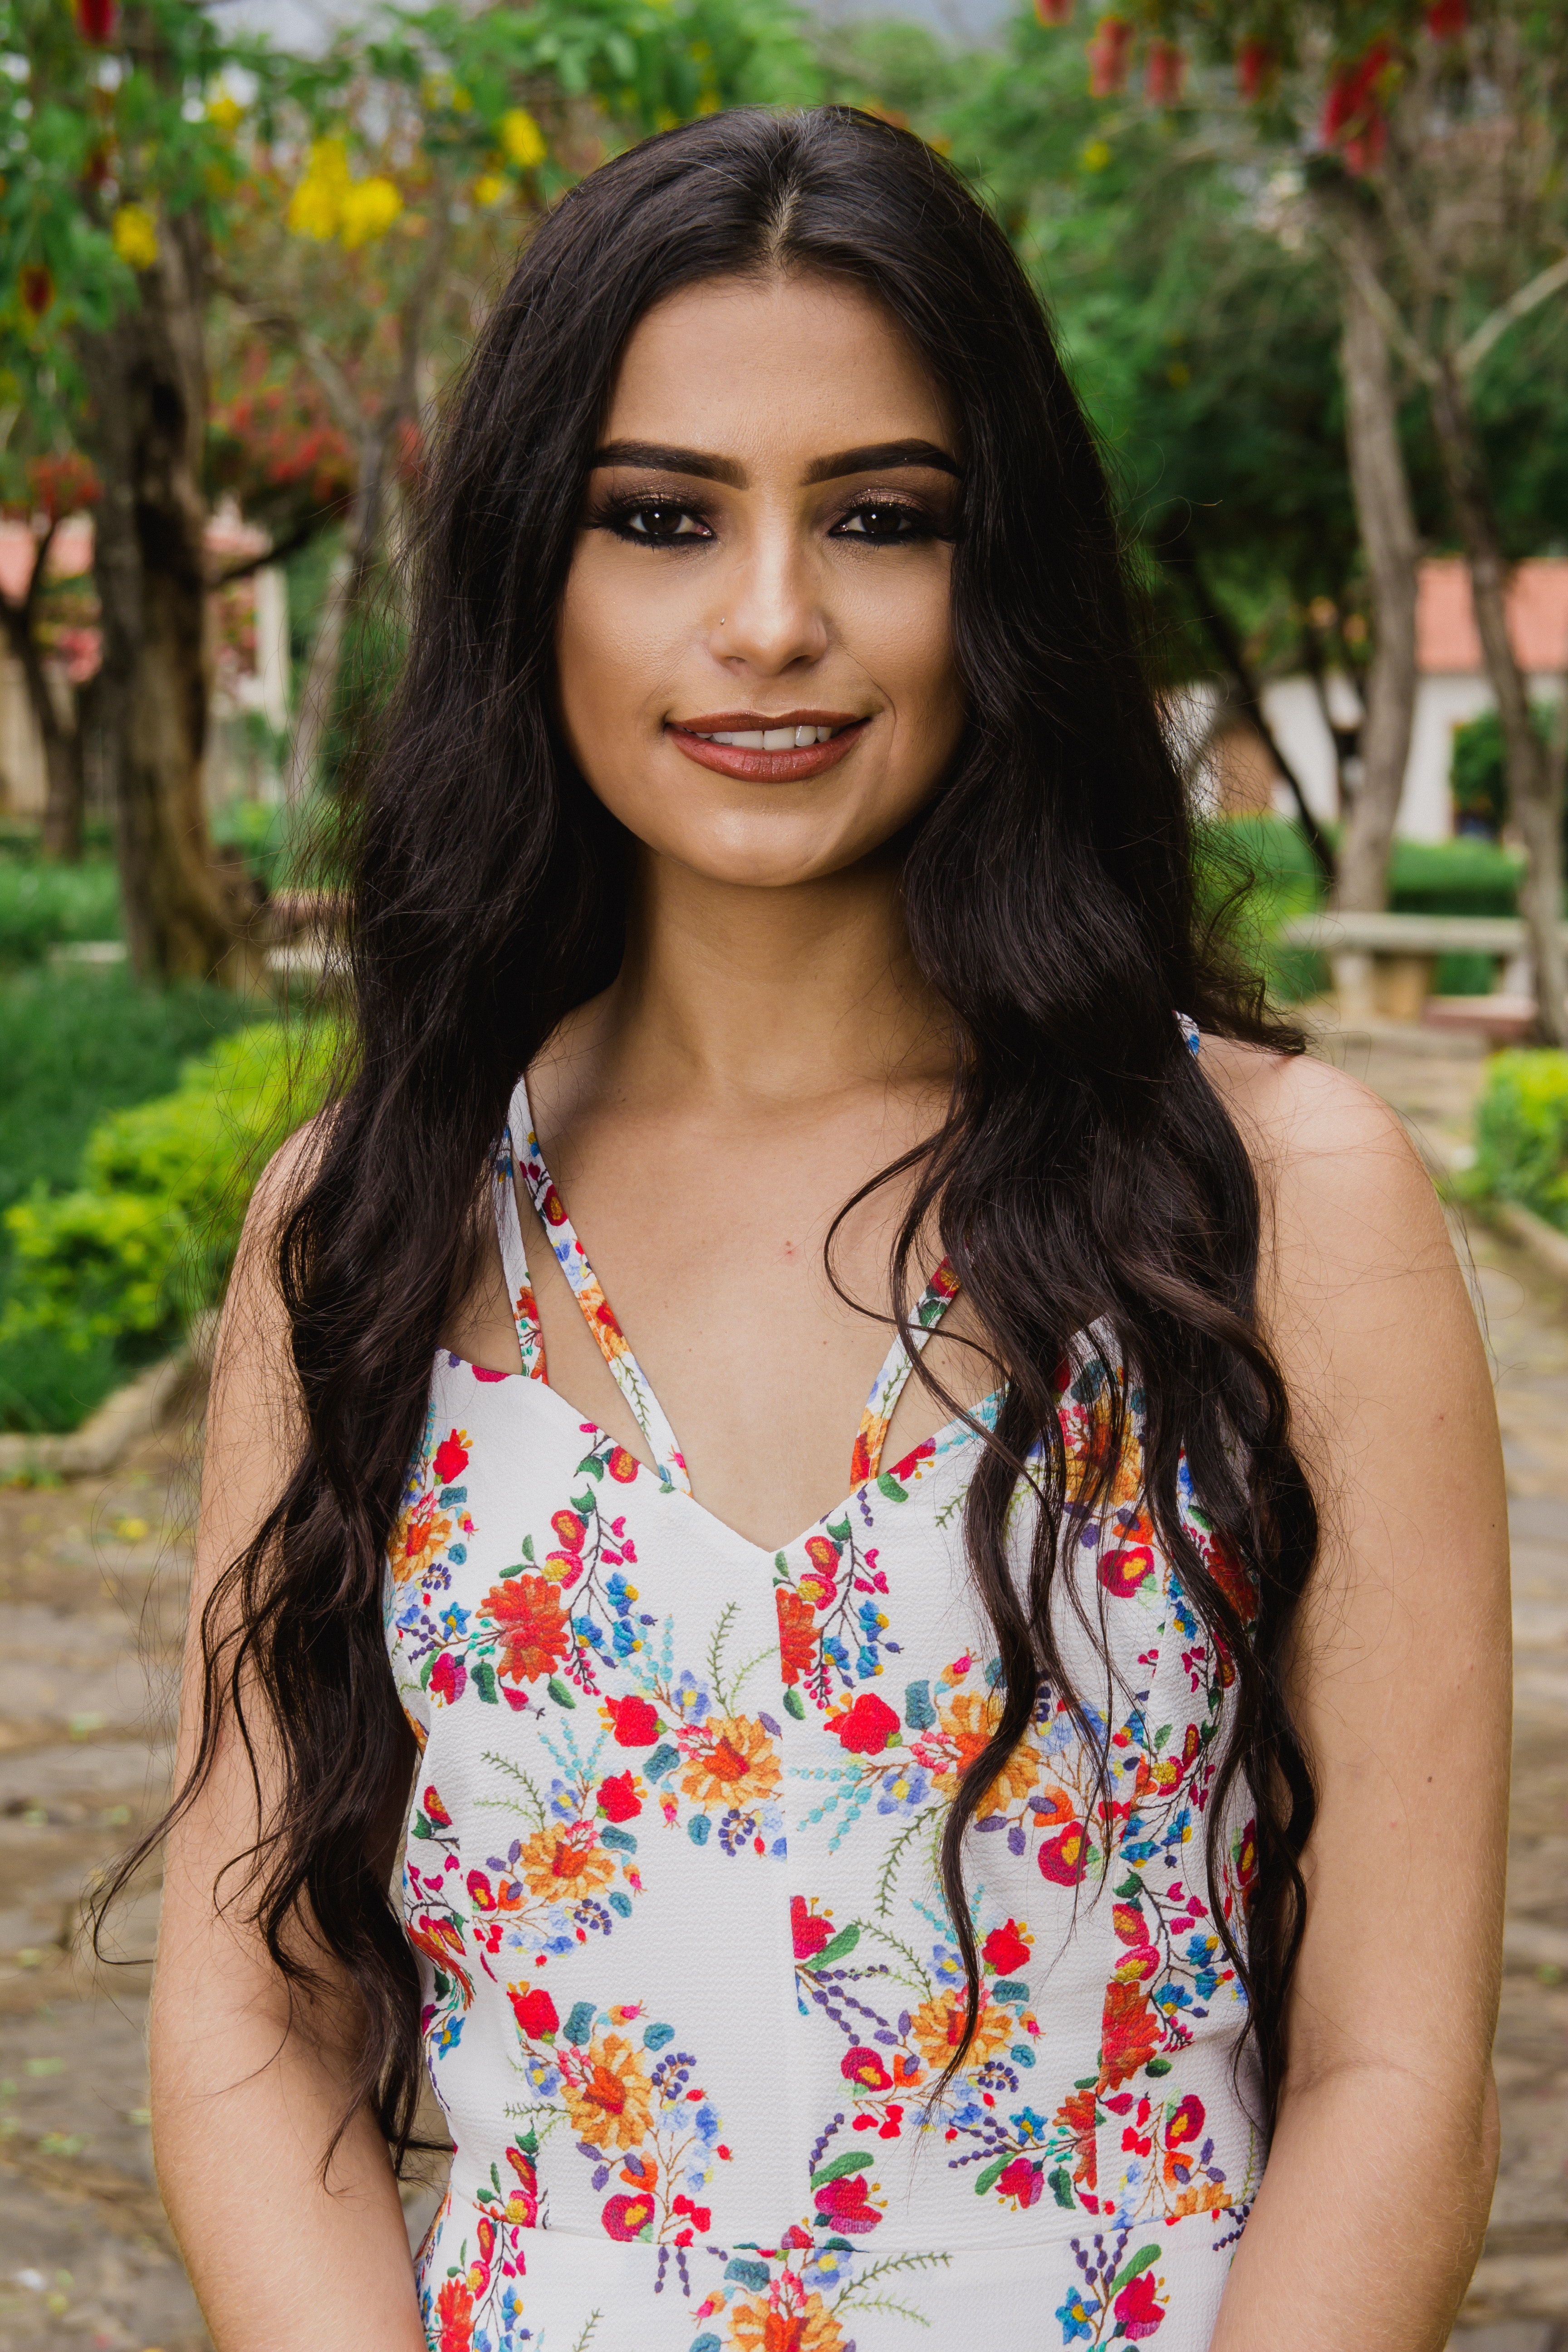 Woman wearing white and multicolored floral sleeveless top photo